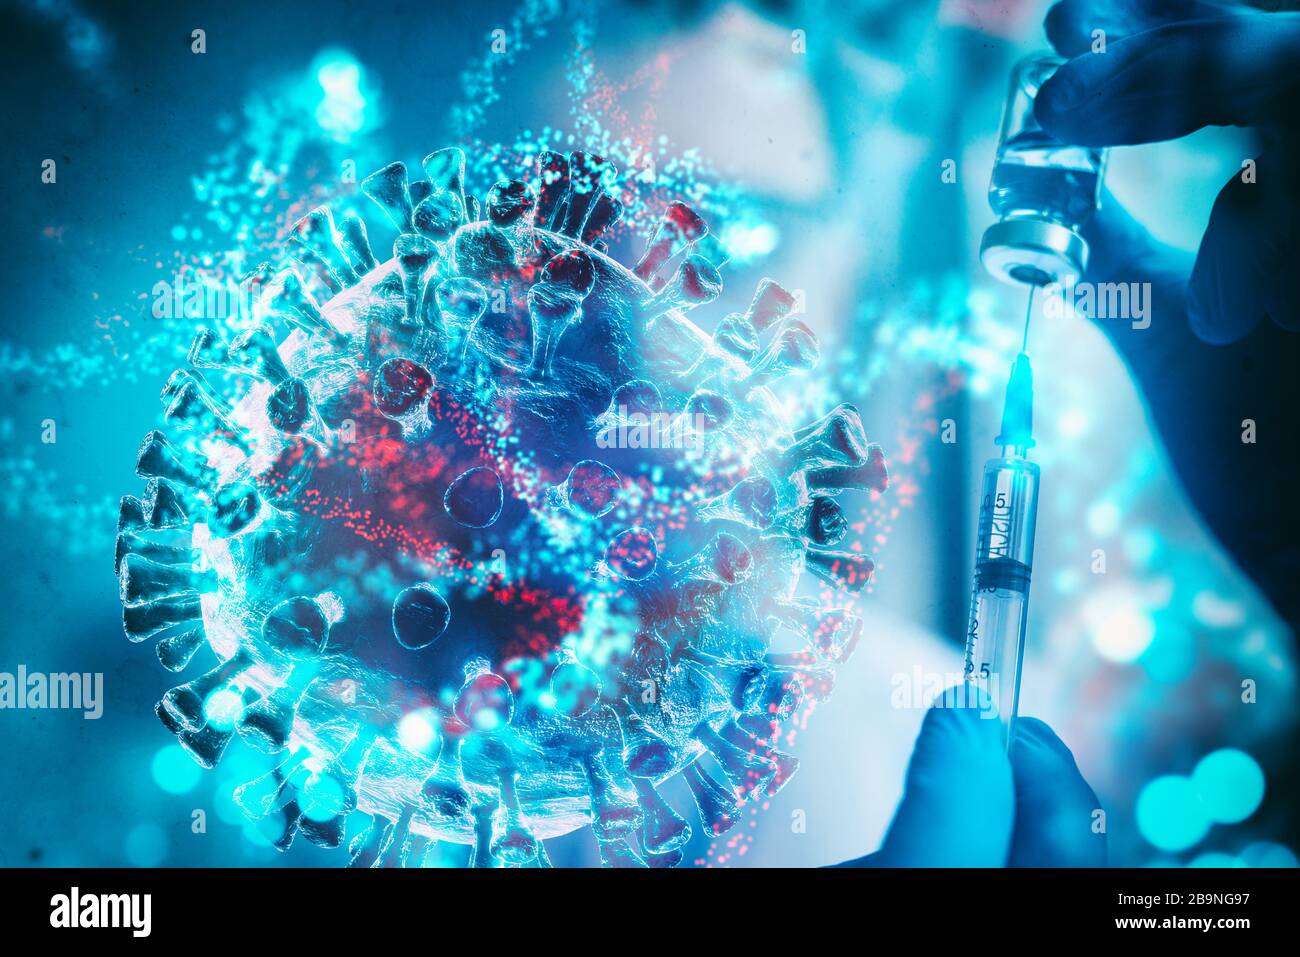 Research and development of vaccines against diseases caused by the virus Stock Photo